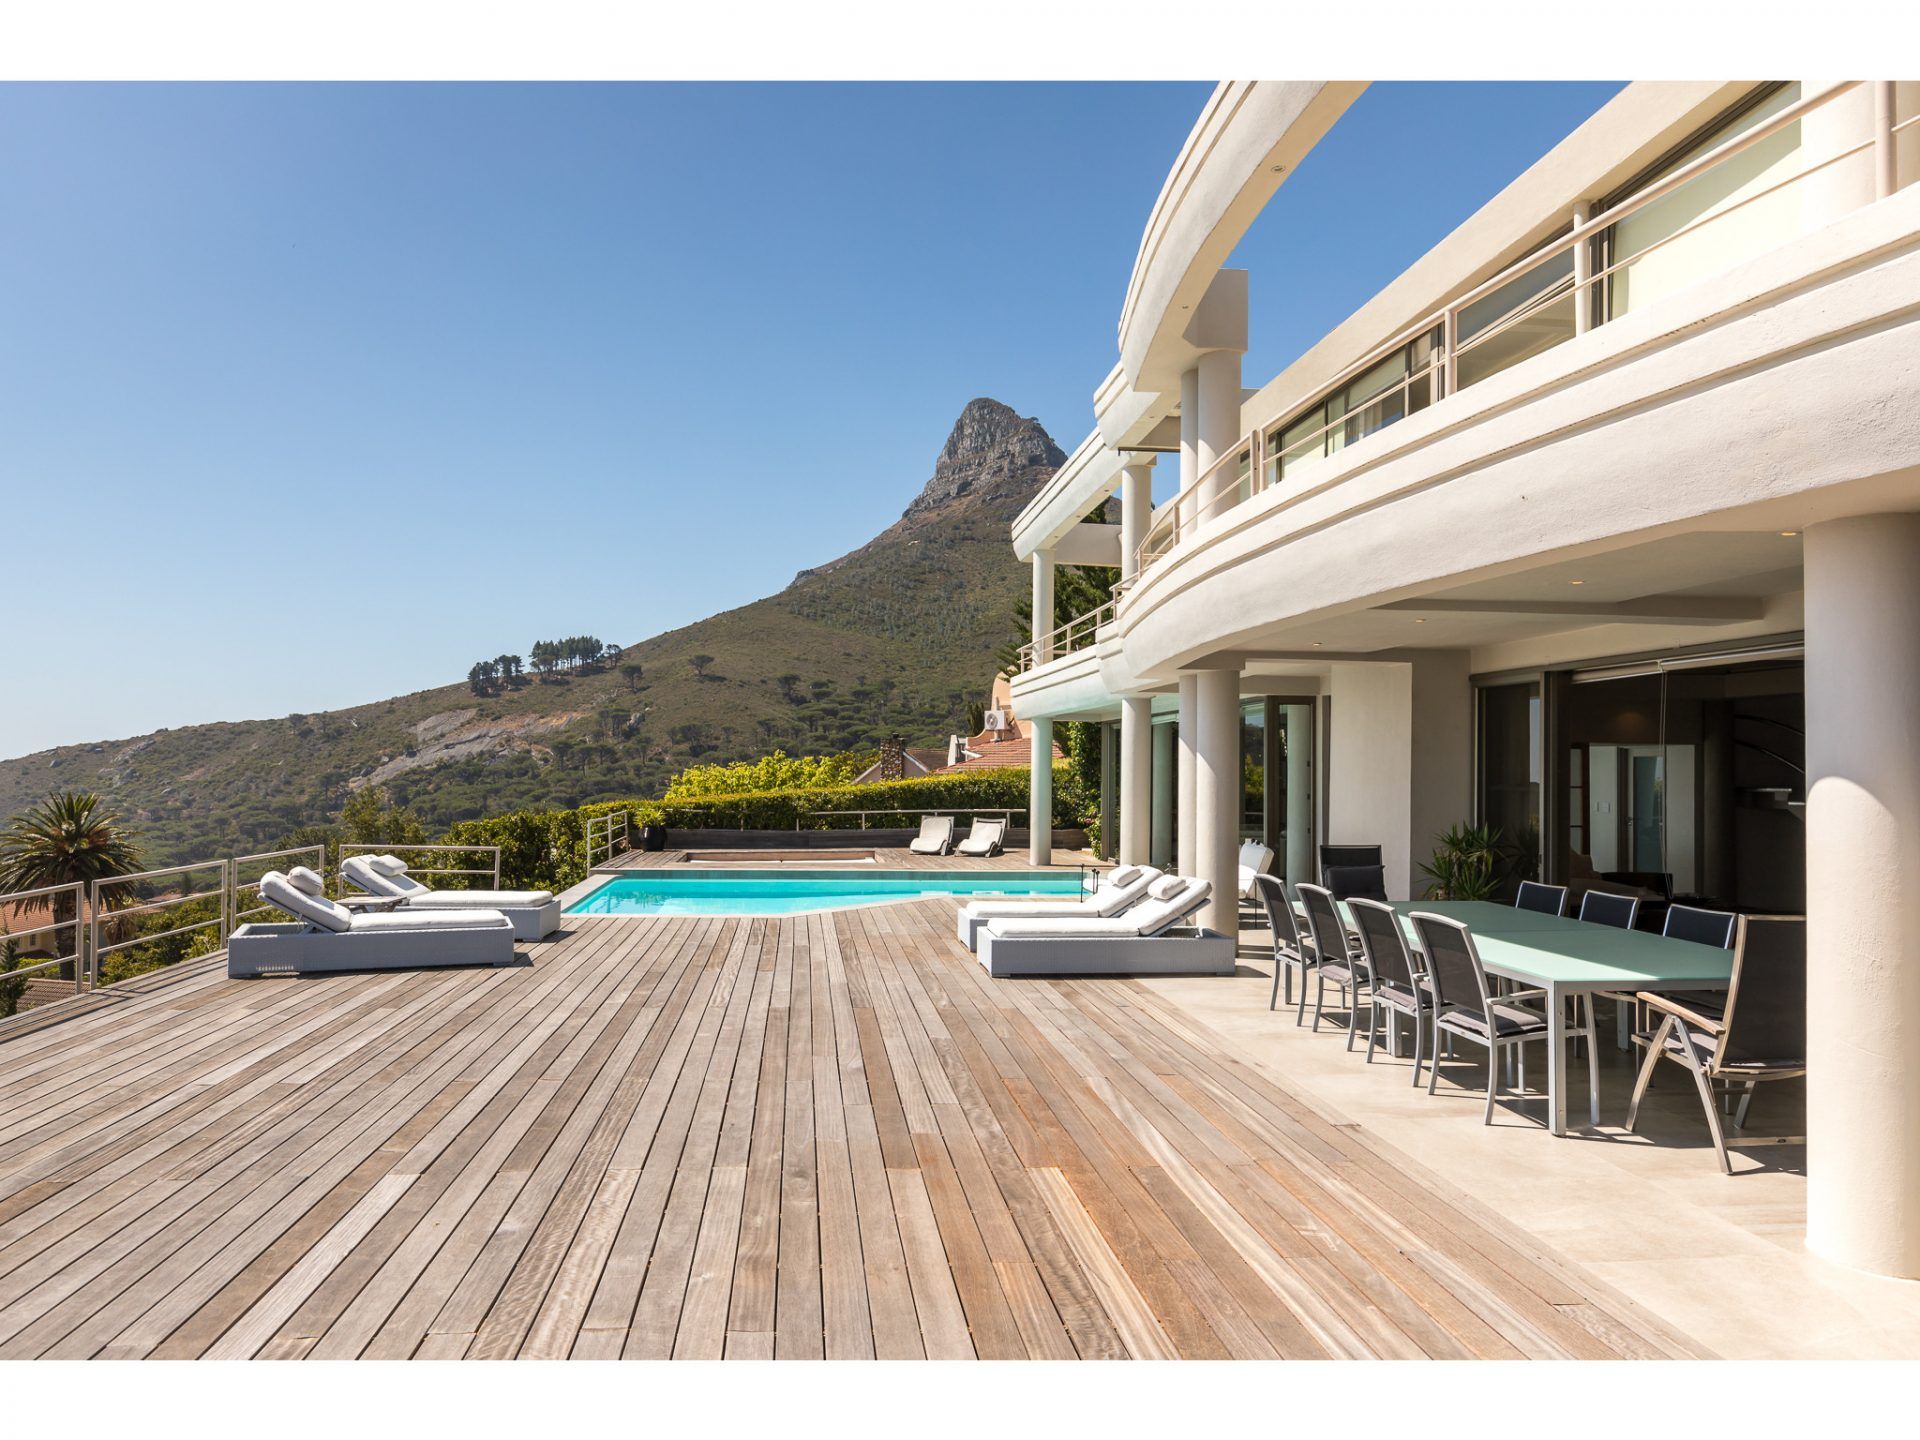 Photo 12 of Geneva Sunsets accommodation in Camps Bay, Cape Town with 6 bedrooms and 7 bathrooms